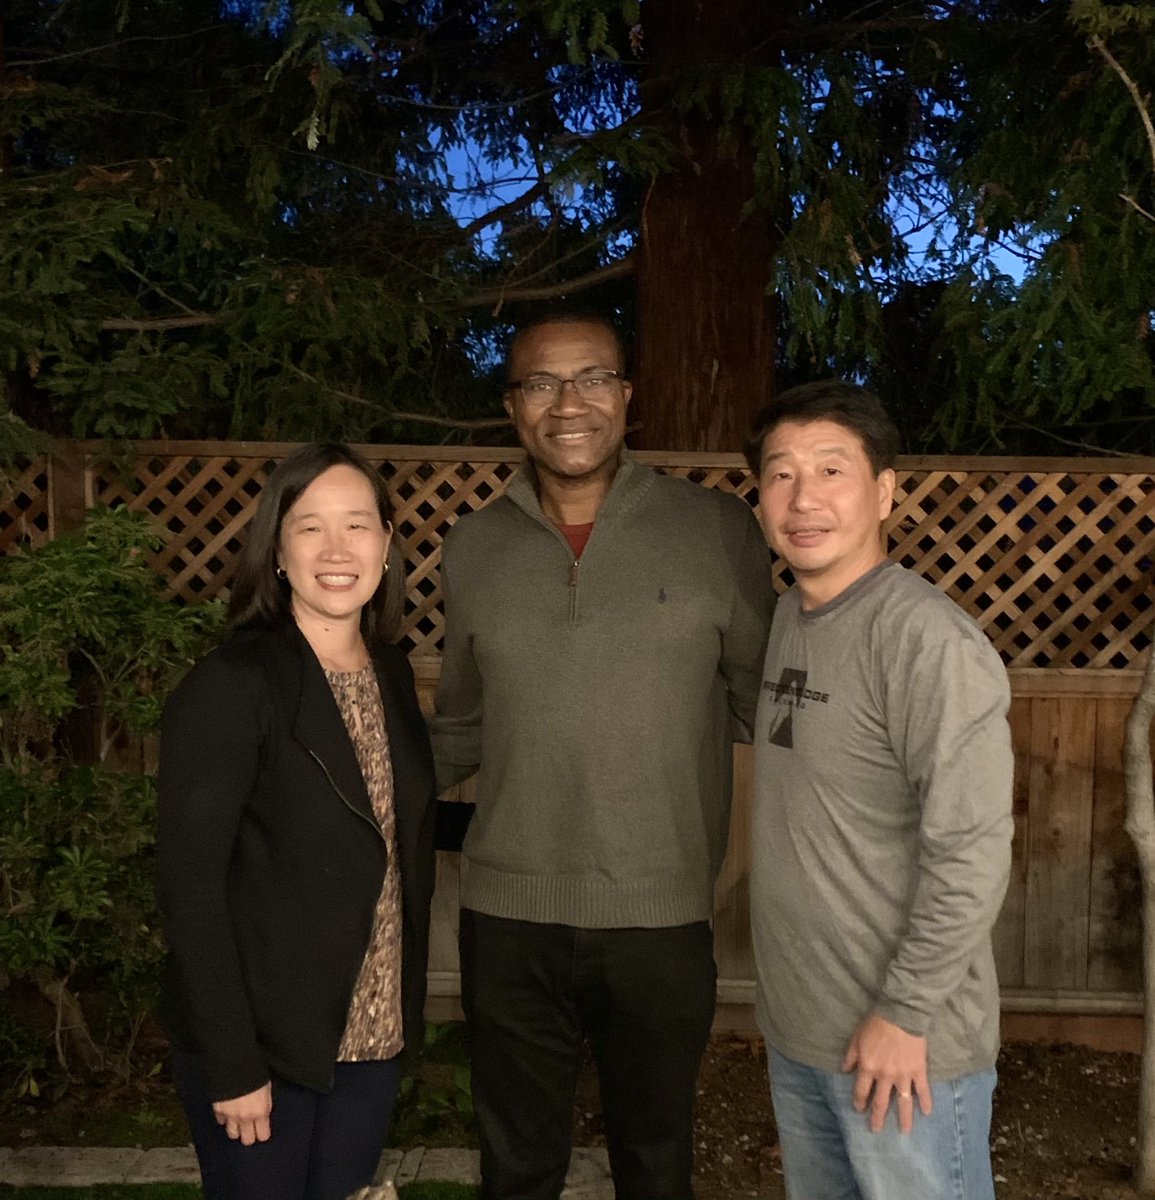 .@SeanM_Wu and I have been friends with @EldrinL since my intern year. So it’s extra special that Eldrin and I are now division chiefs together @StanfordDeptMed 😊